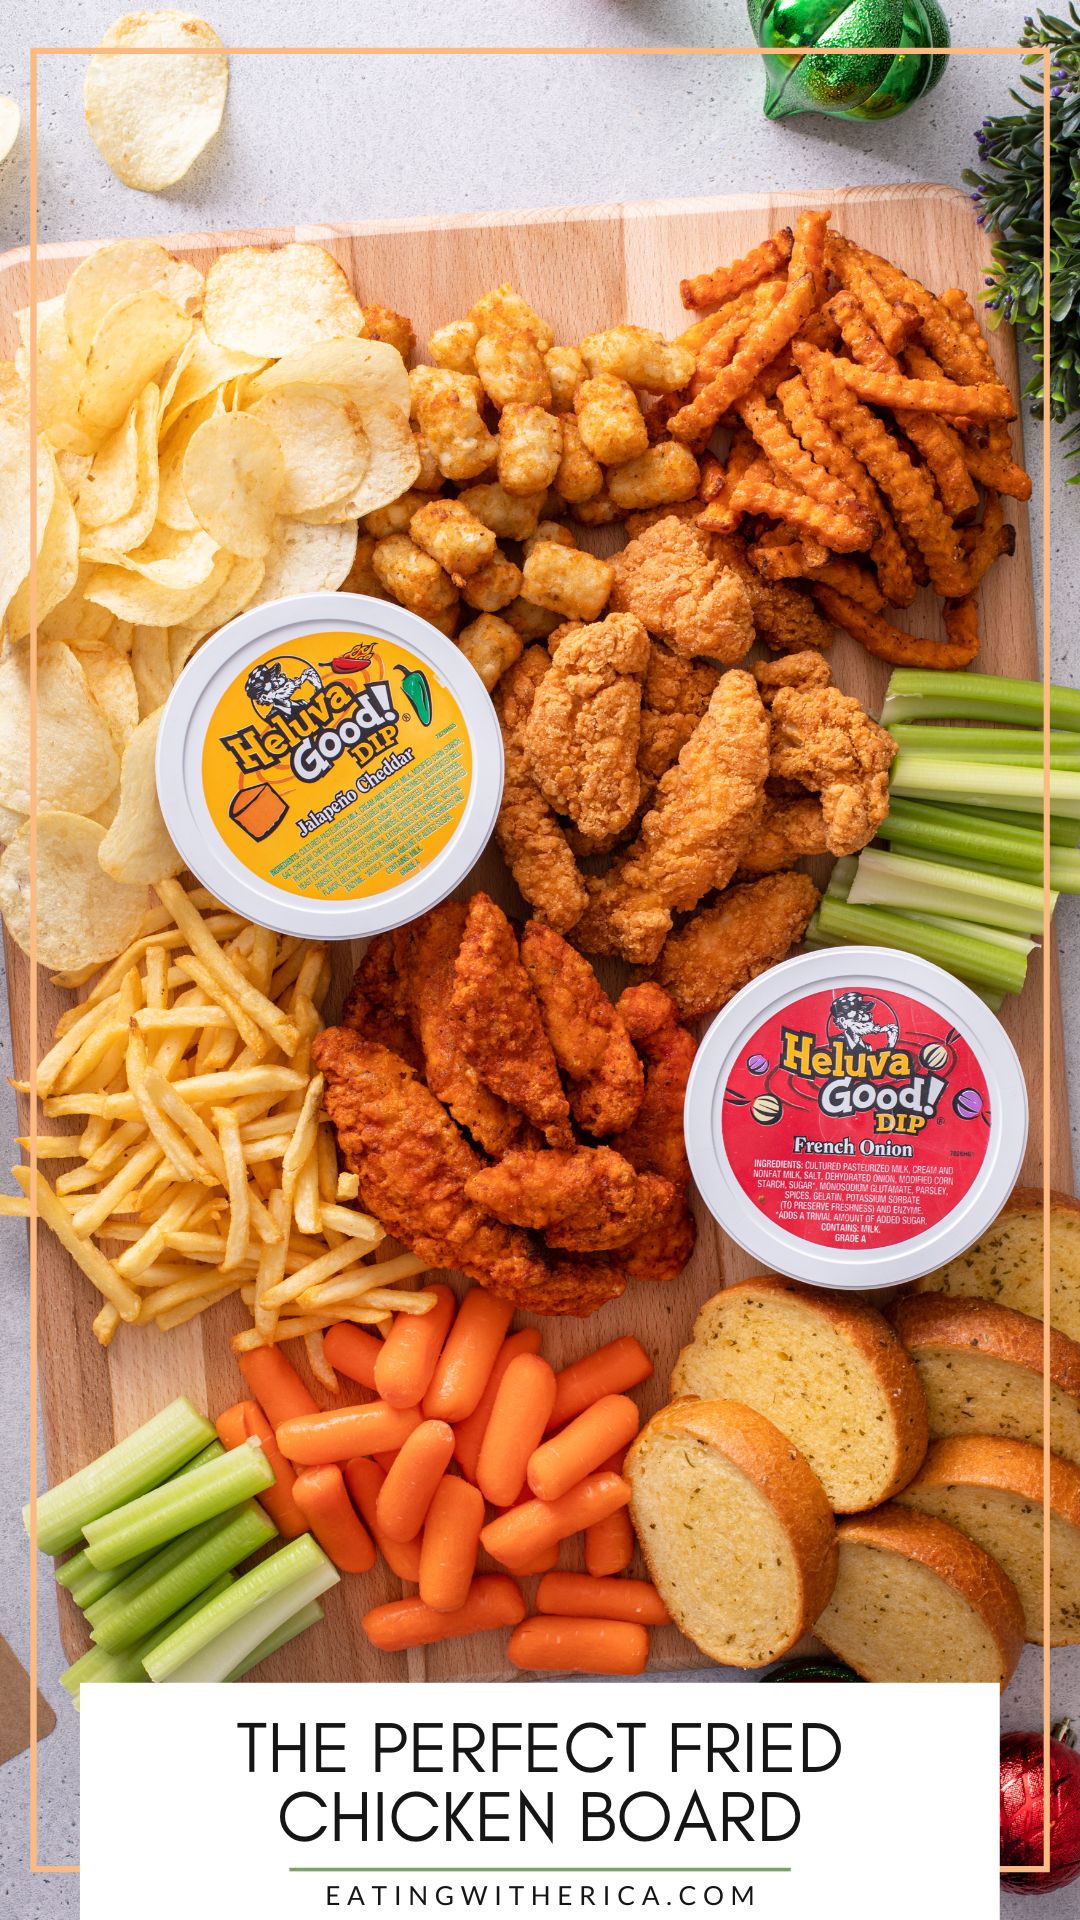 Looking for the perfectly fun yet easy dinner idea? Try this Fried Chicken Board from Eating with Erica! It will make tonights dinner so much better- CLICK HERE to make it ASAP! 